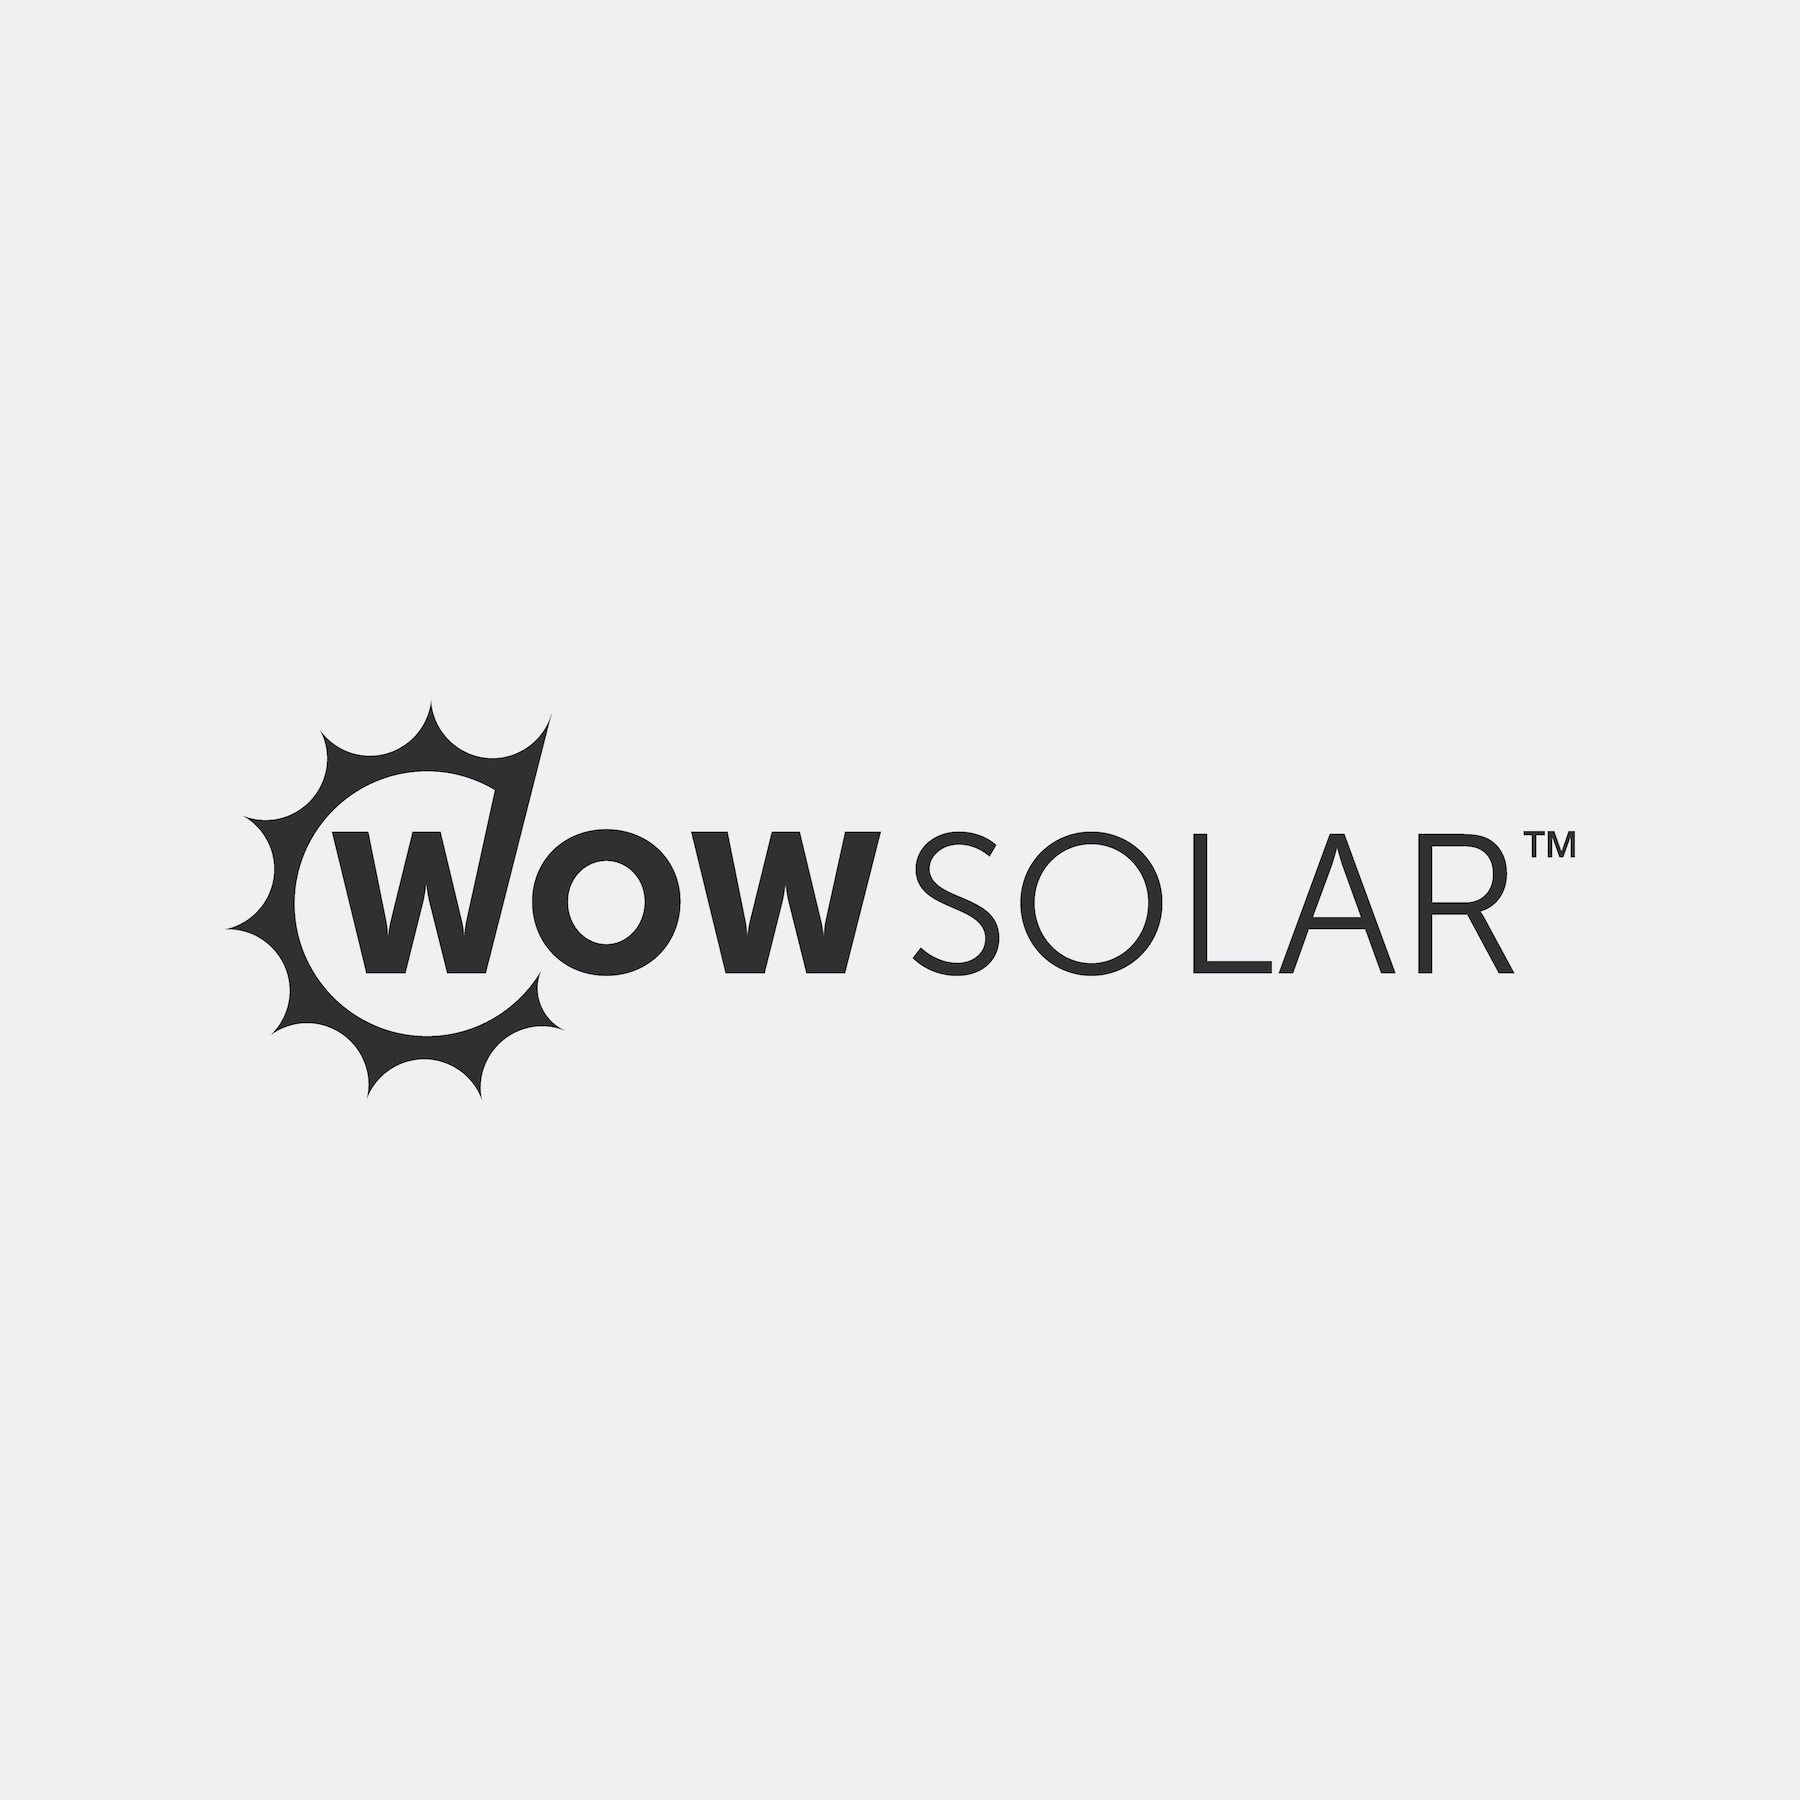 wow solar 1.png